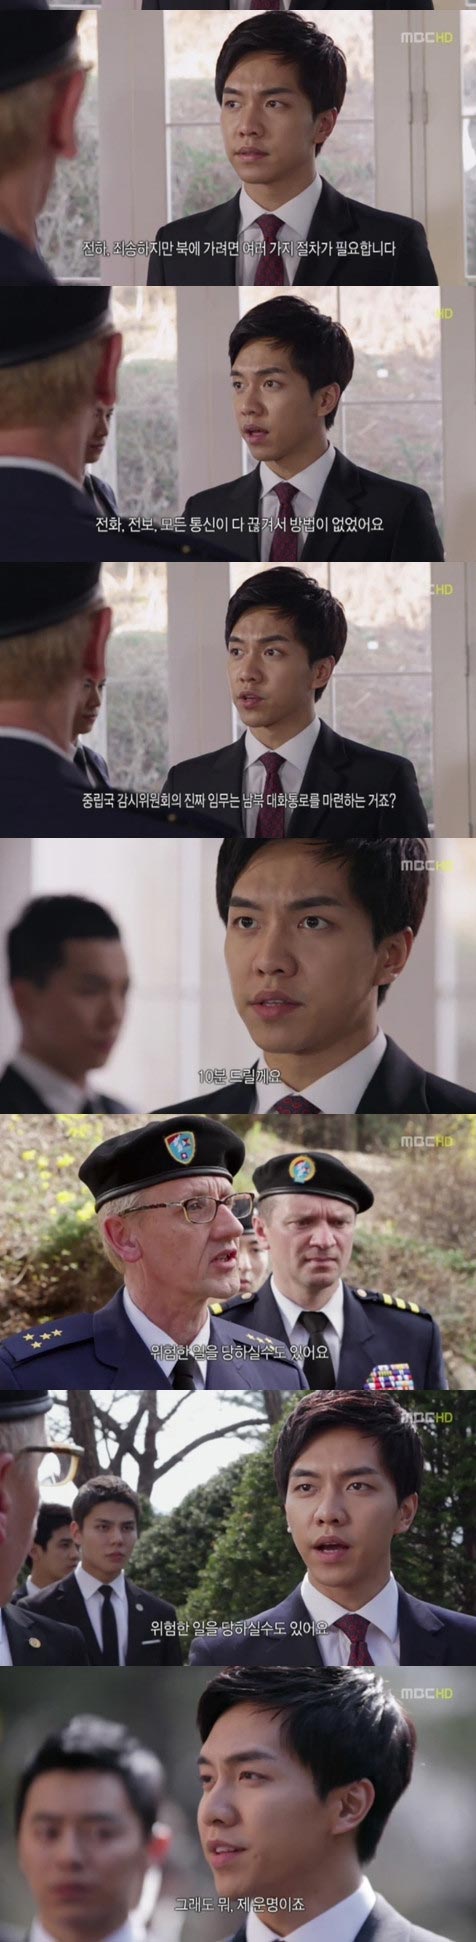 Lee Seung Gi Fluent English Pronunciation Acting in King 2Hearts - Drama  Haven